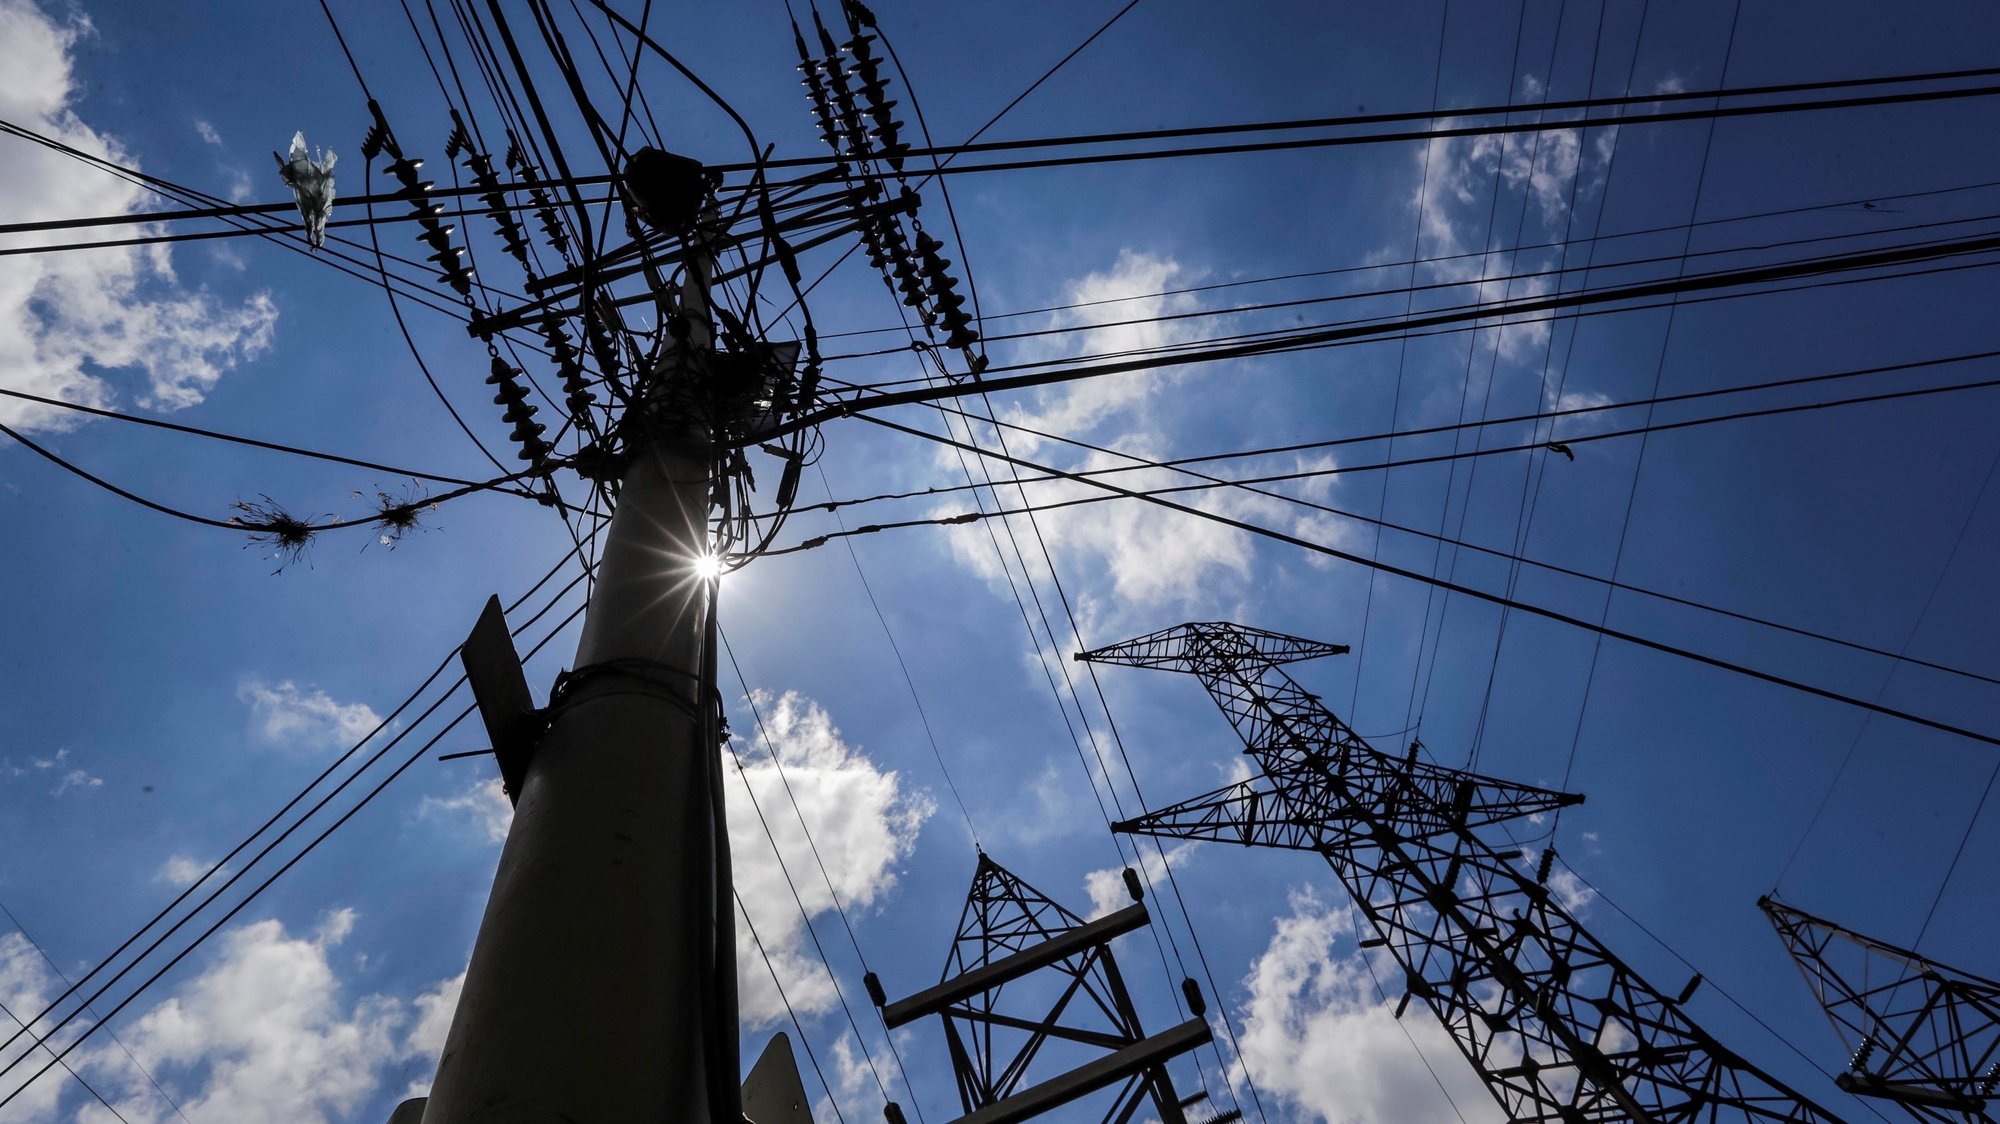 epa07483099 A view of electricity pylons, in Caracas, Venezuela, 03 April 2019. West Venezuela started receiving electricity intermittently in the states of Zulia, Falcon, Merida and Trujillo after 100 hours without power.  EPA/MIGUEL GUTIERREZ